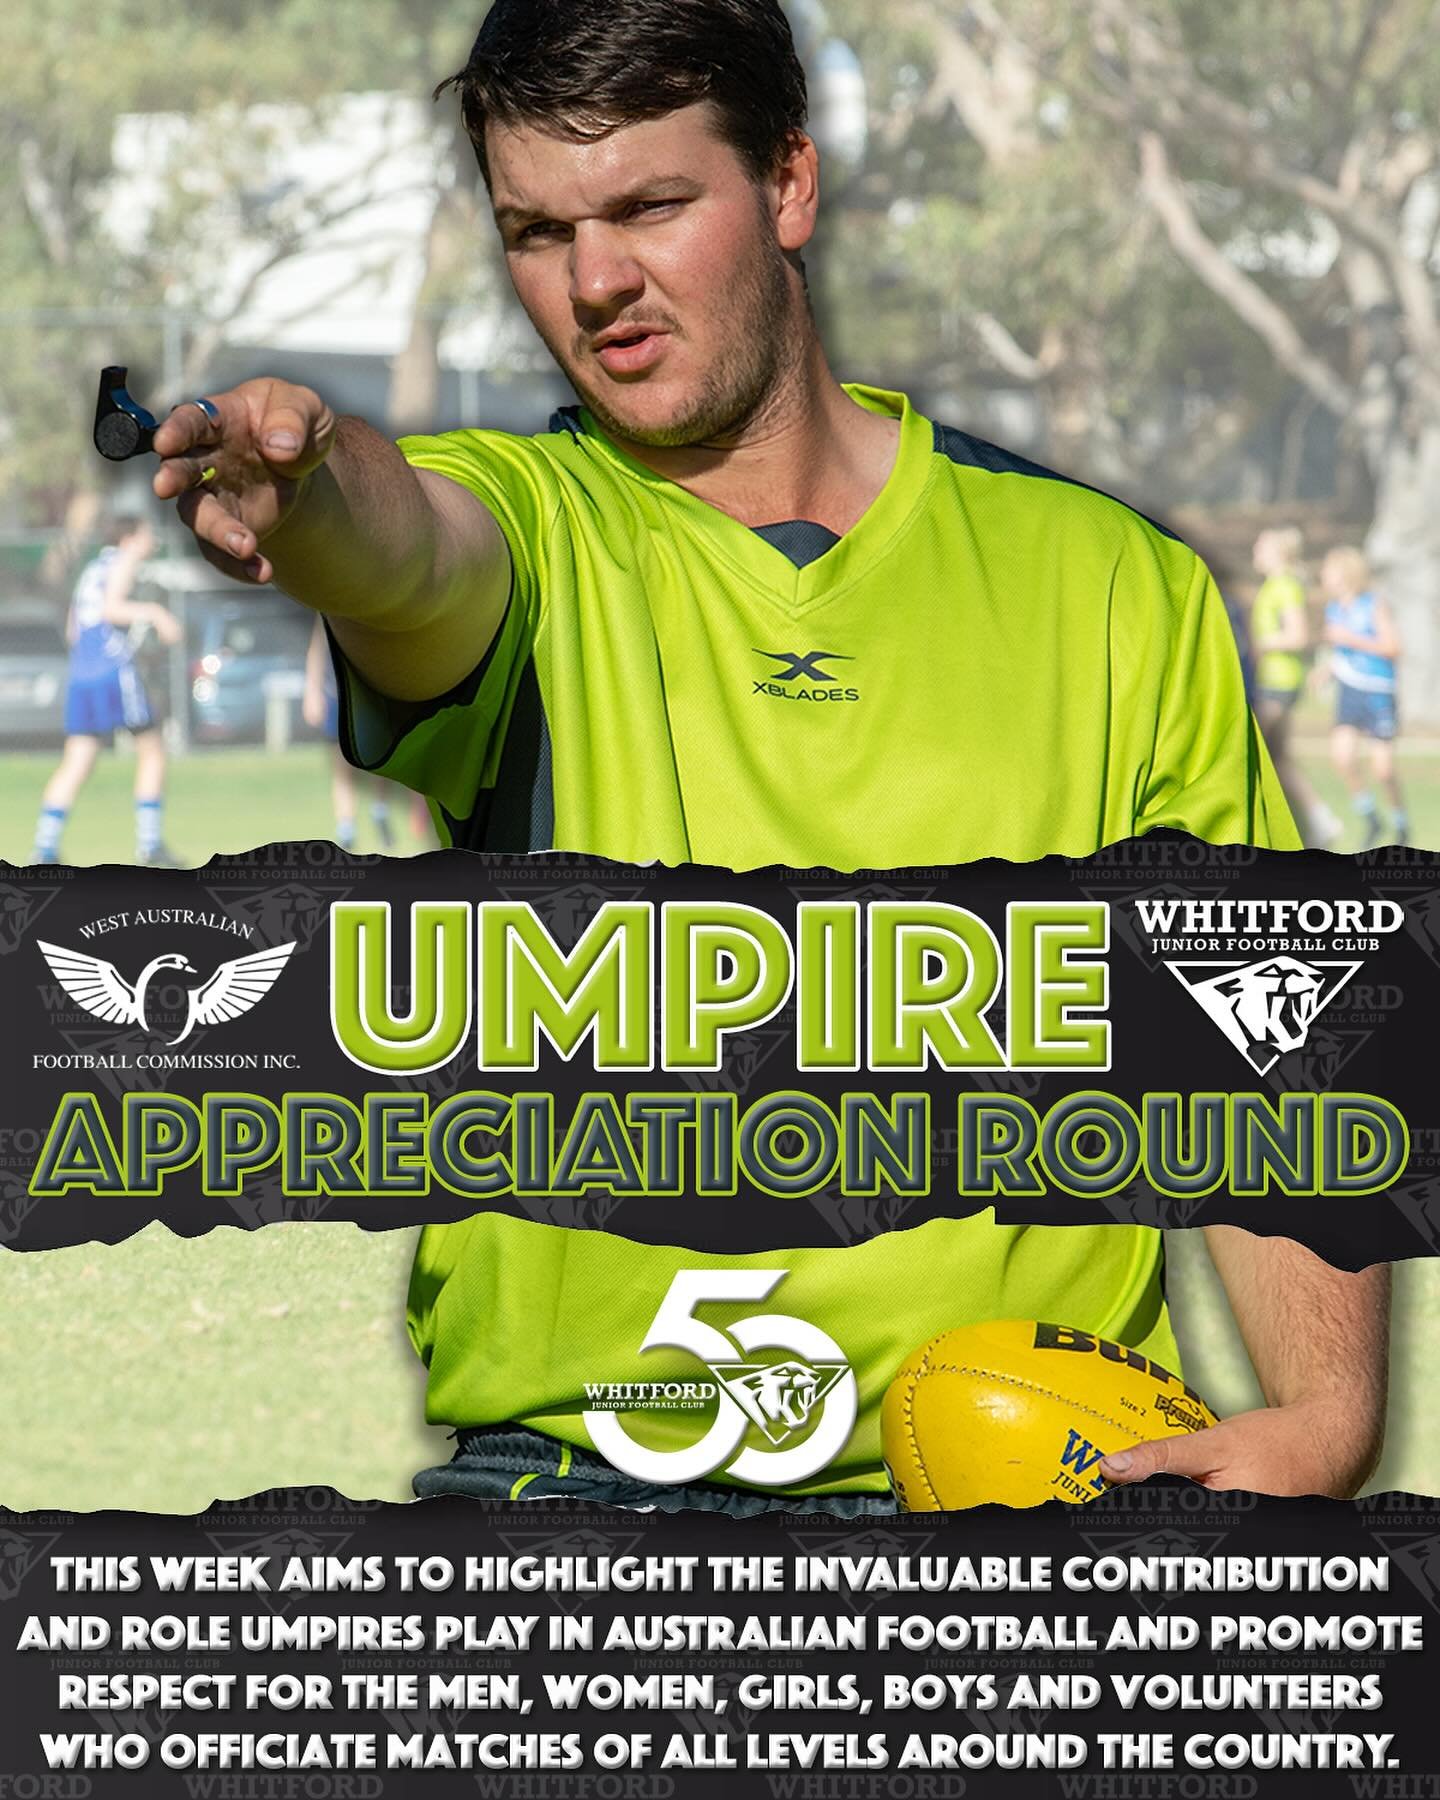 ound 3 aims to highlight the invaluable contribution and role umpires play in Australian football, create awareness around umpiring pathways and promote respect for the men, women, girls, boys and volunteers who officiate matches at all levels of foo